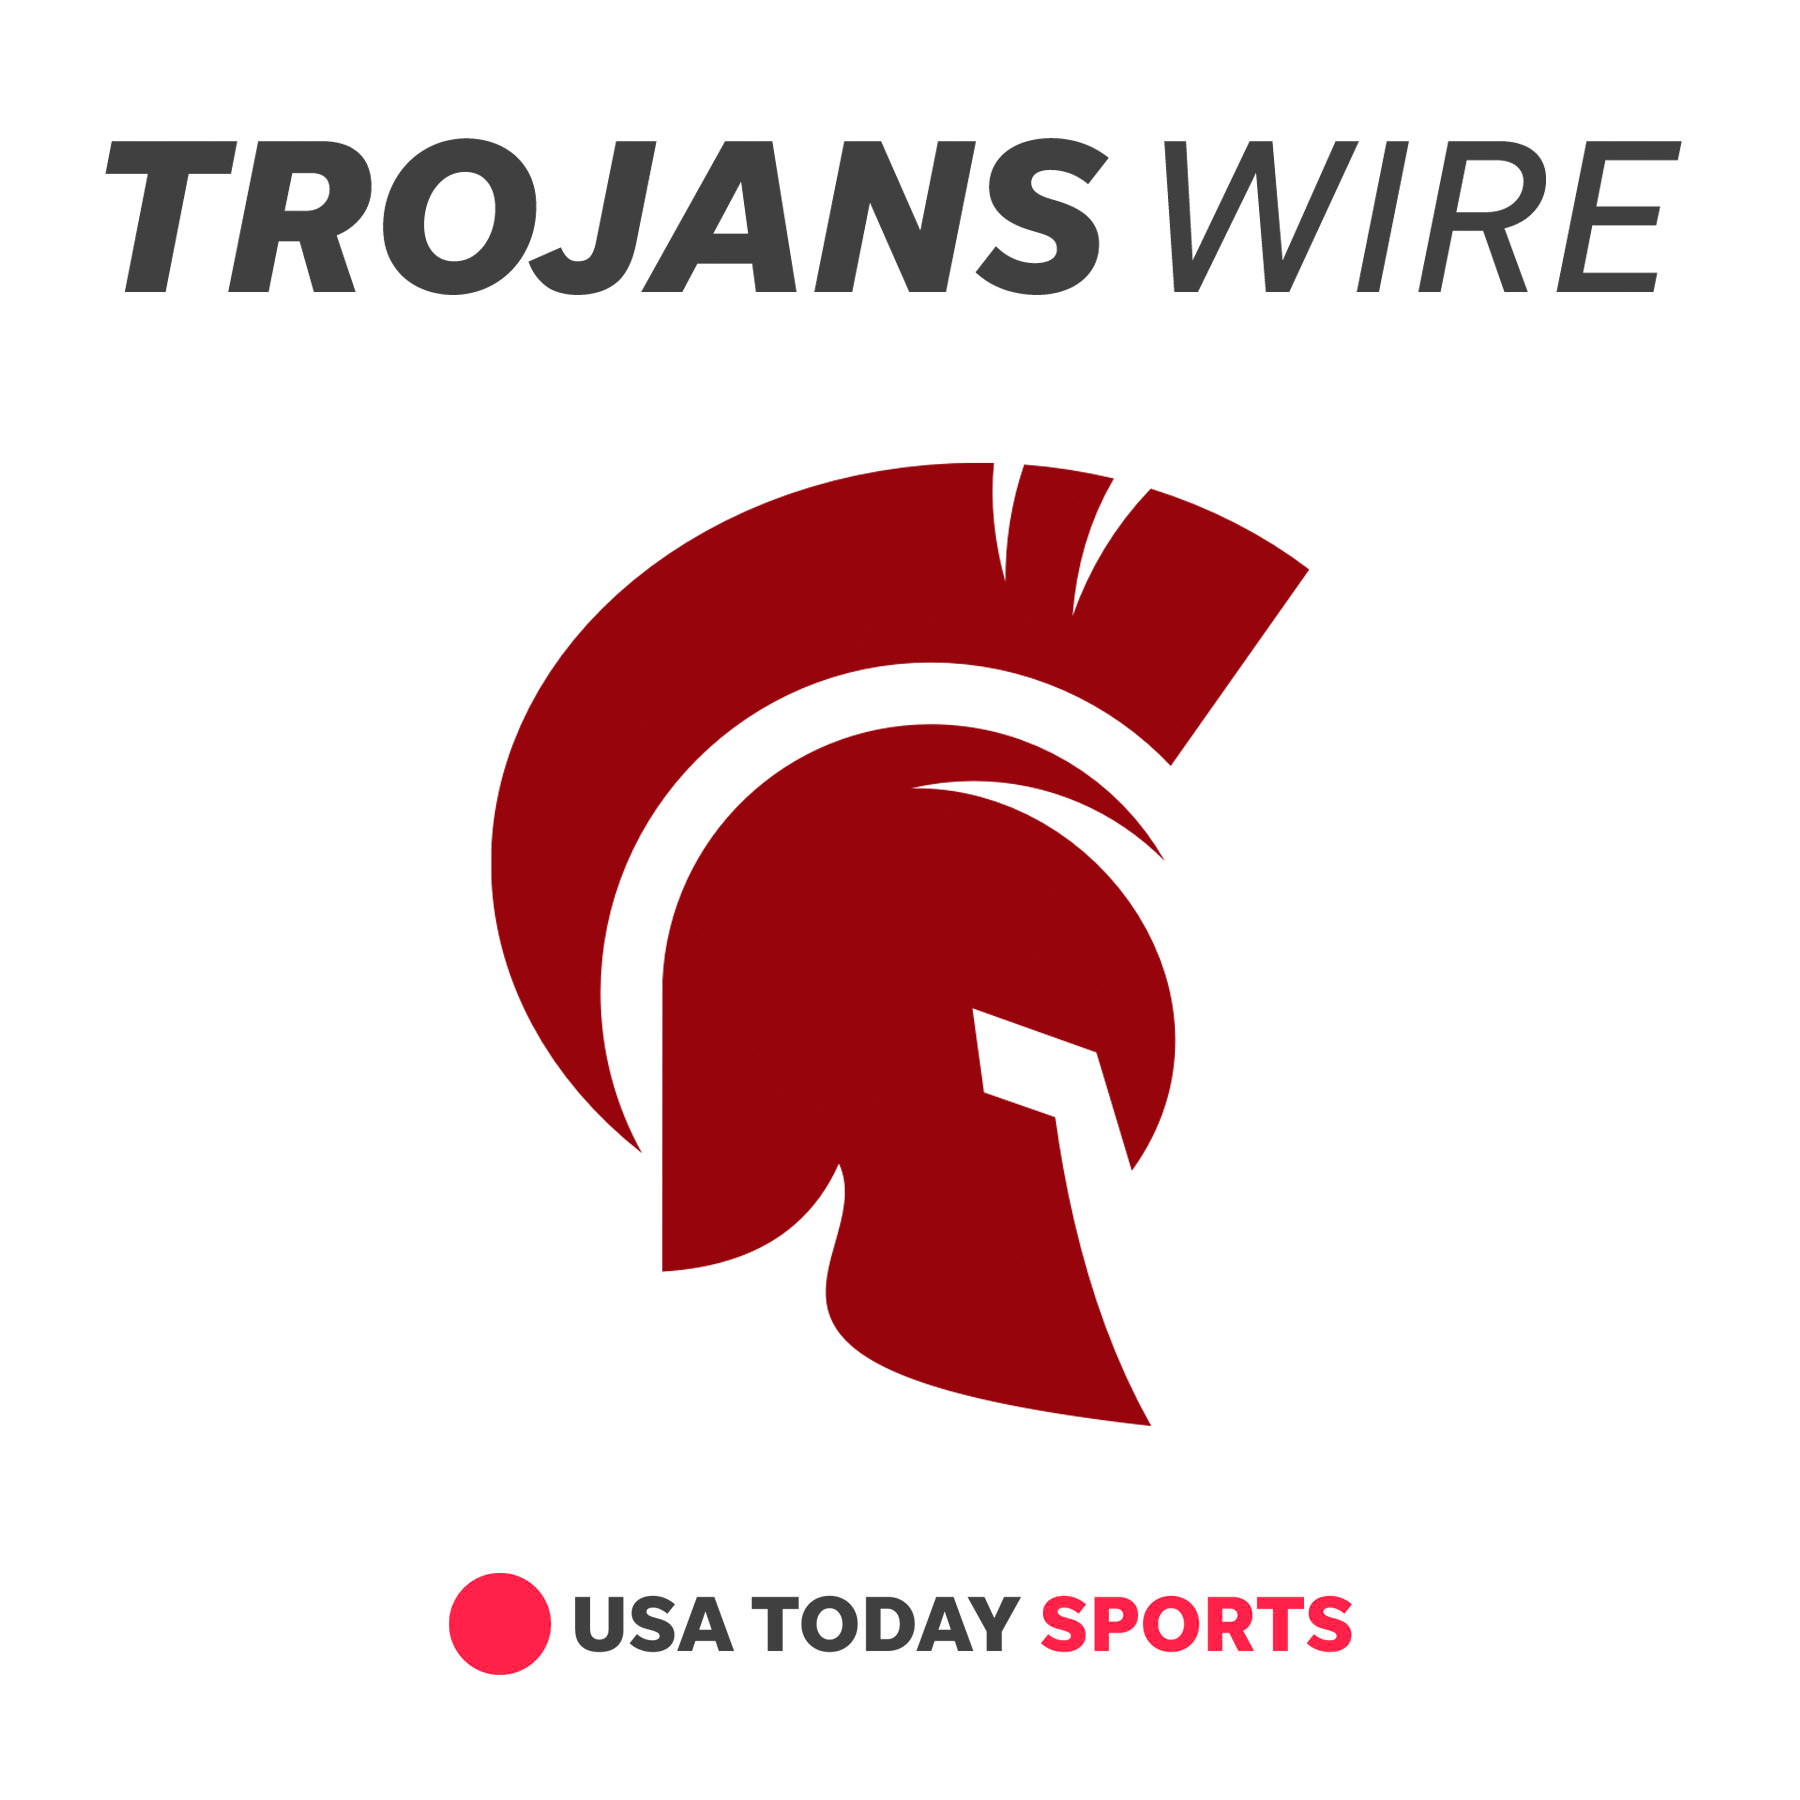 Trojans Wired Men's Hoops Report: February 20